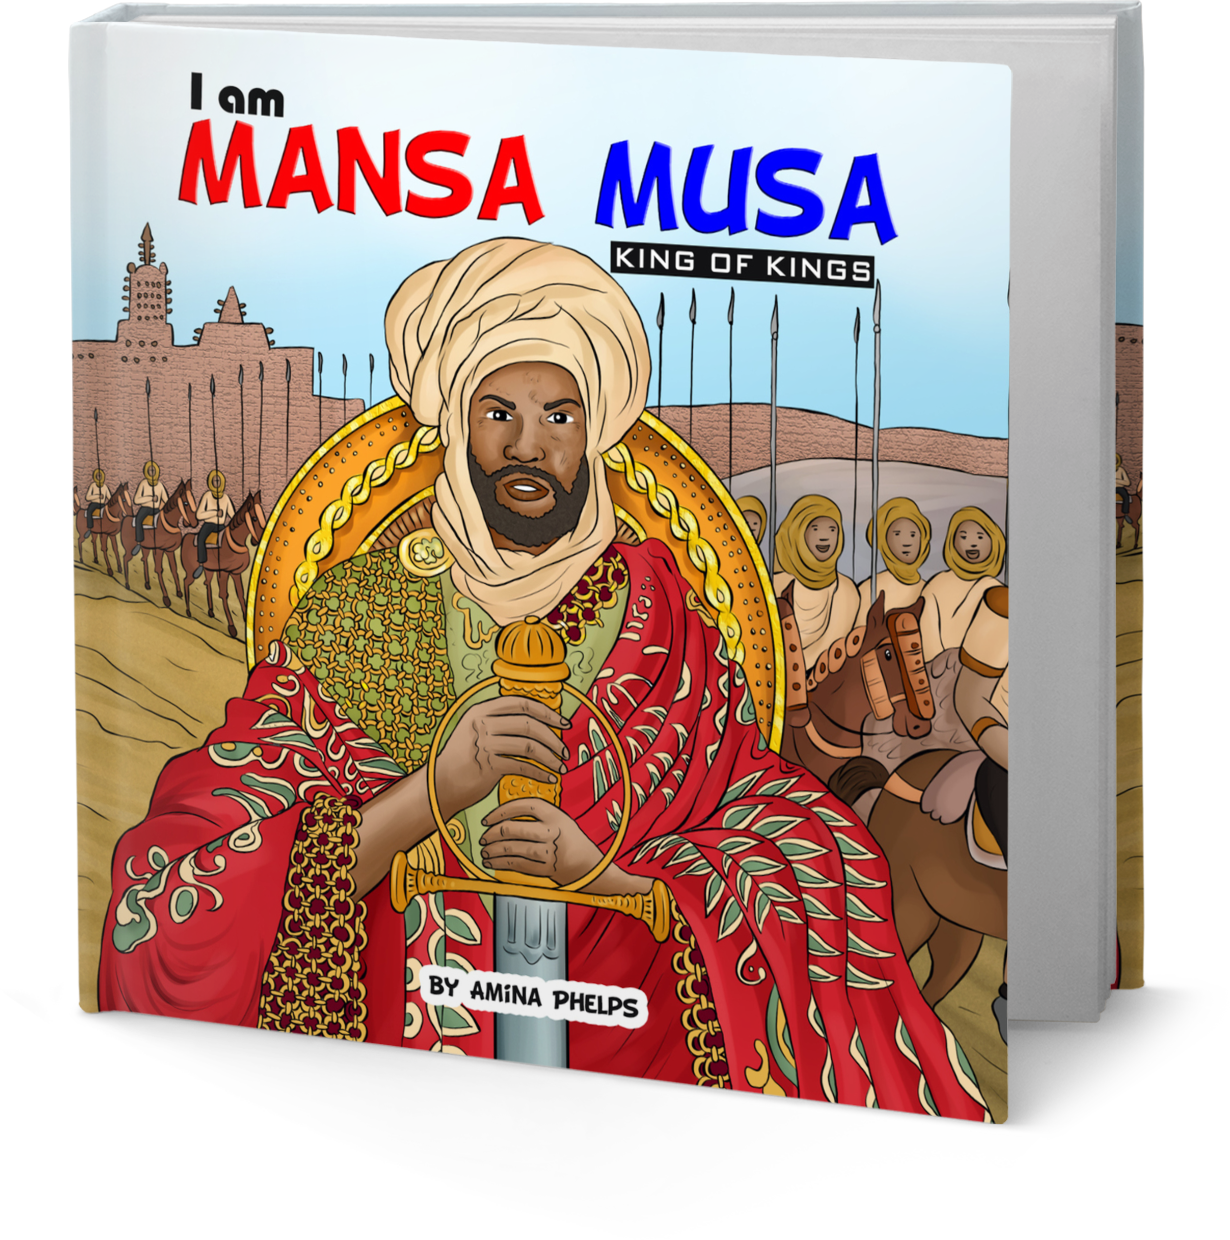 I am Mansa Musa: The King of Kings